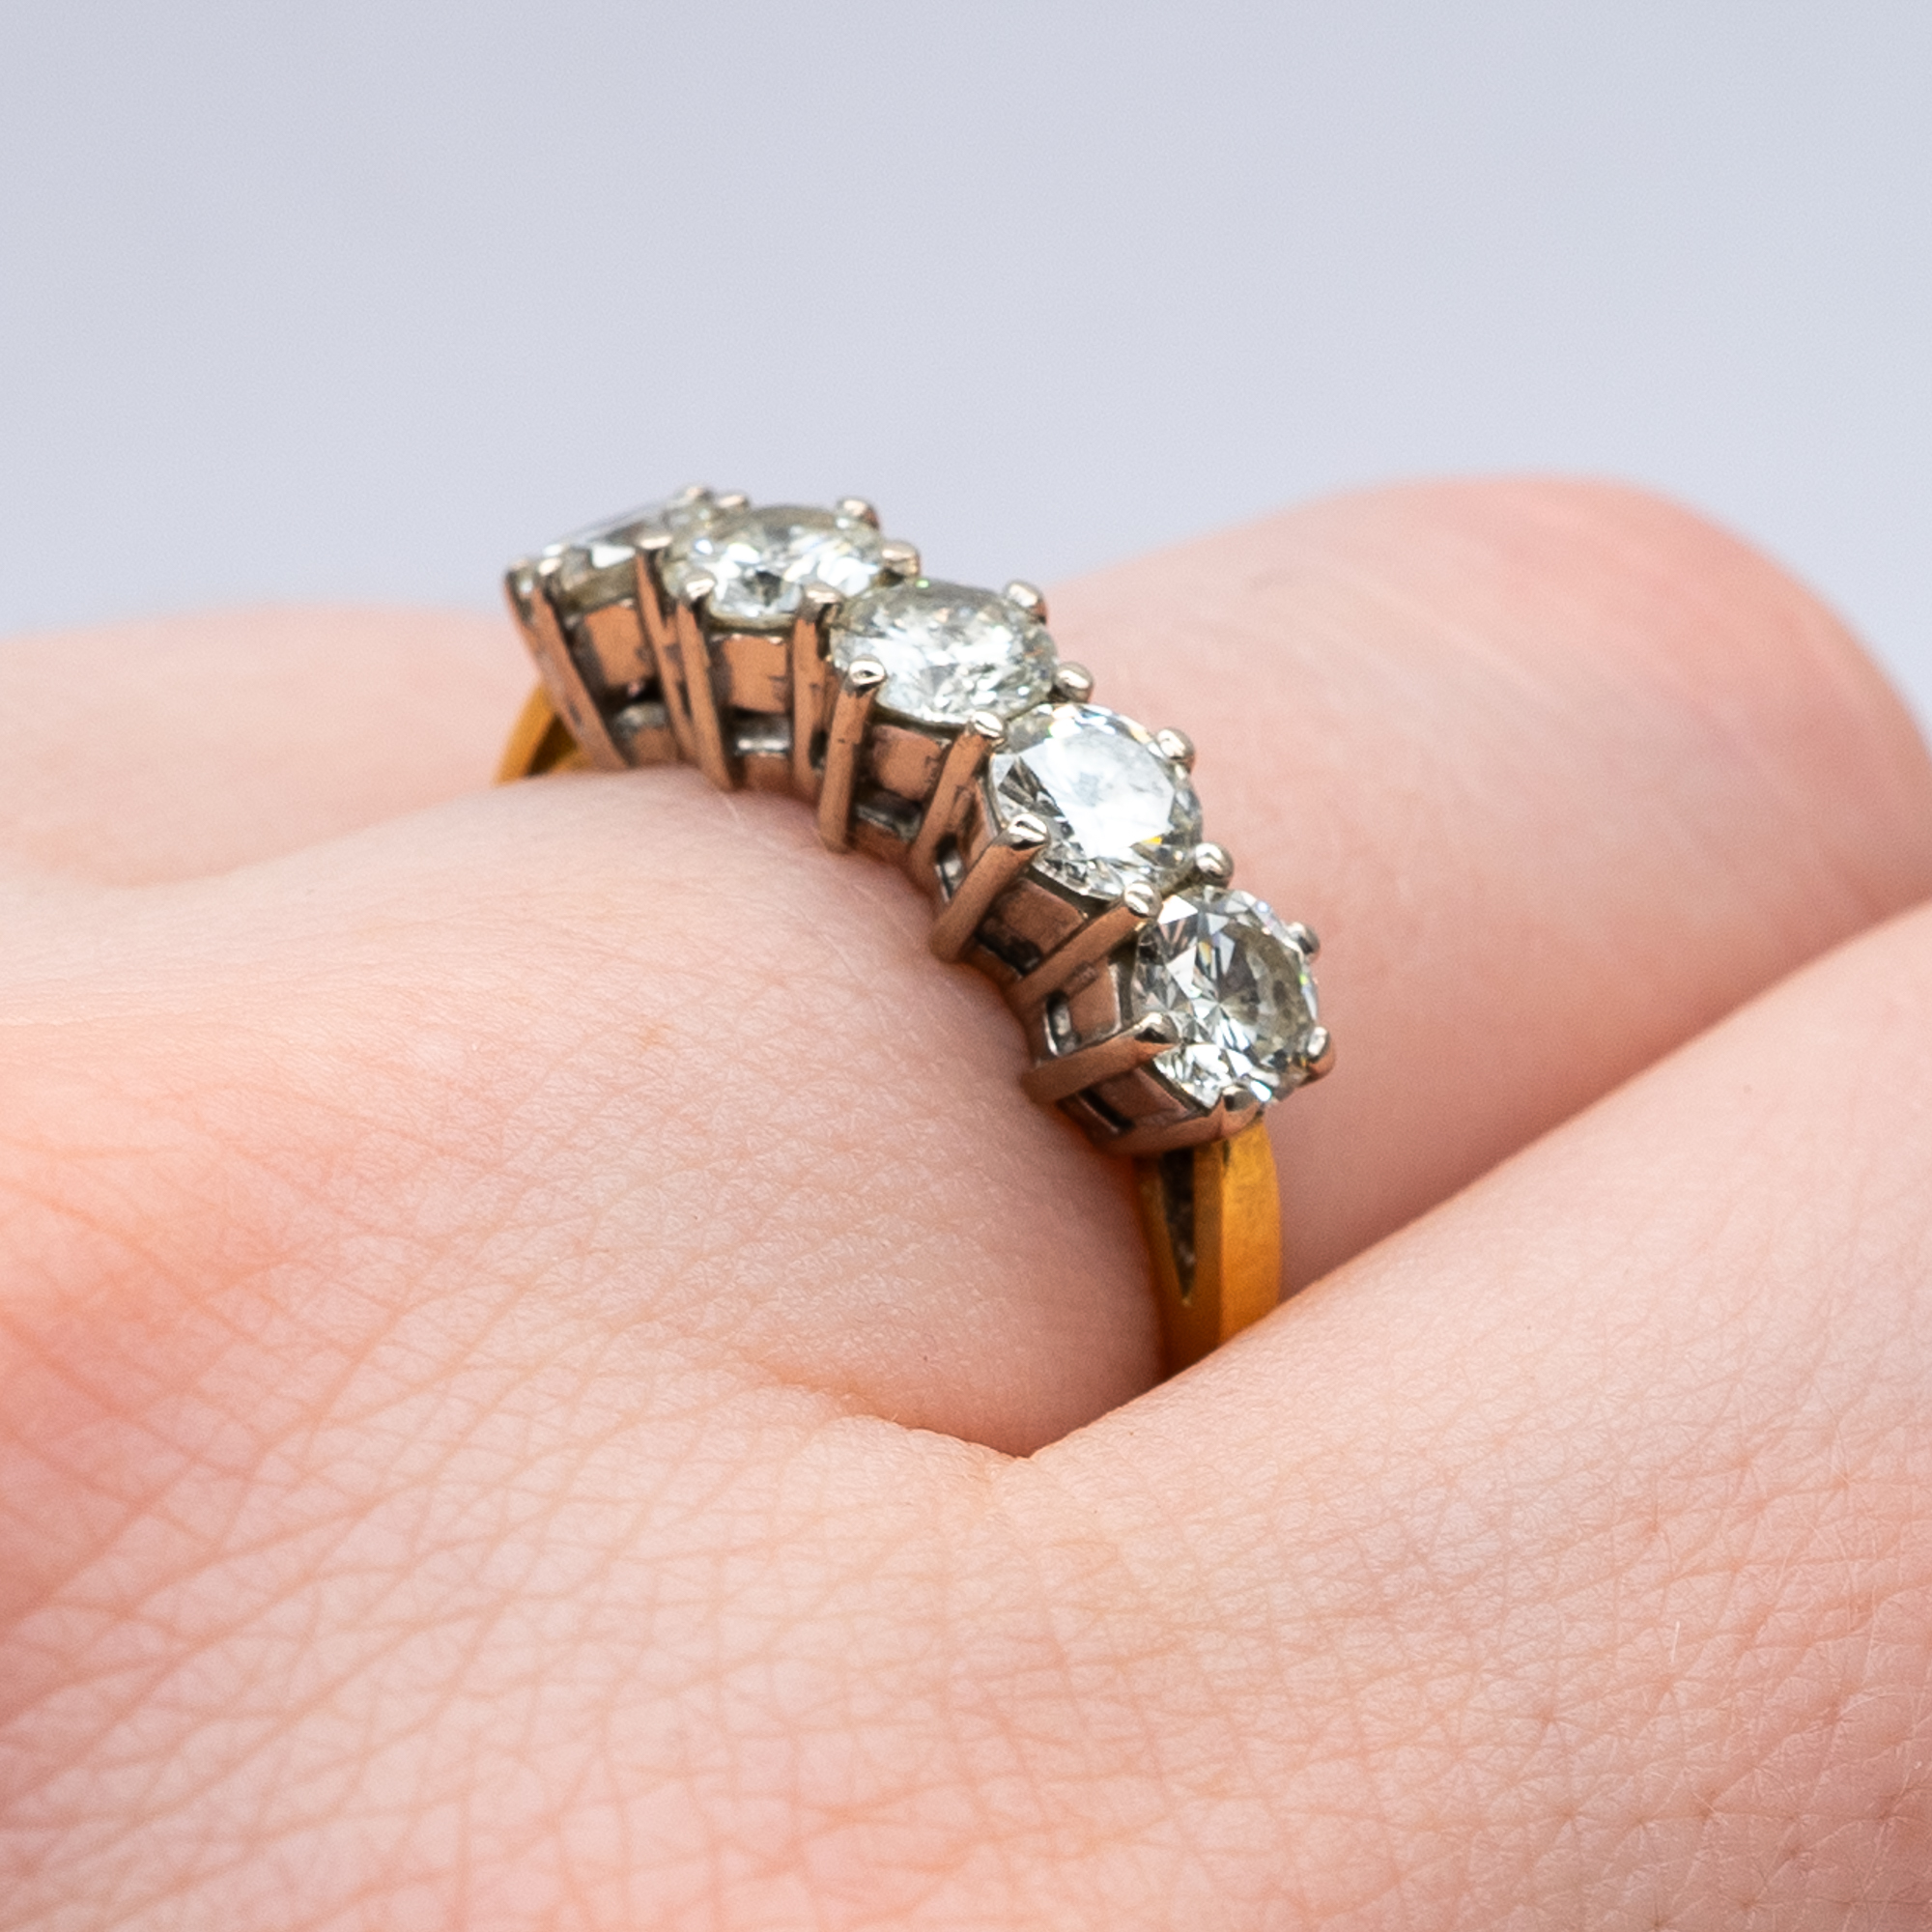 An 18ct yellow gold 5 stone diamond eternity ring - Image 4 of 7